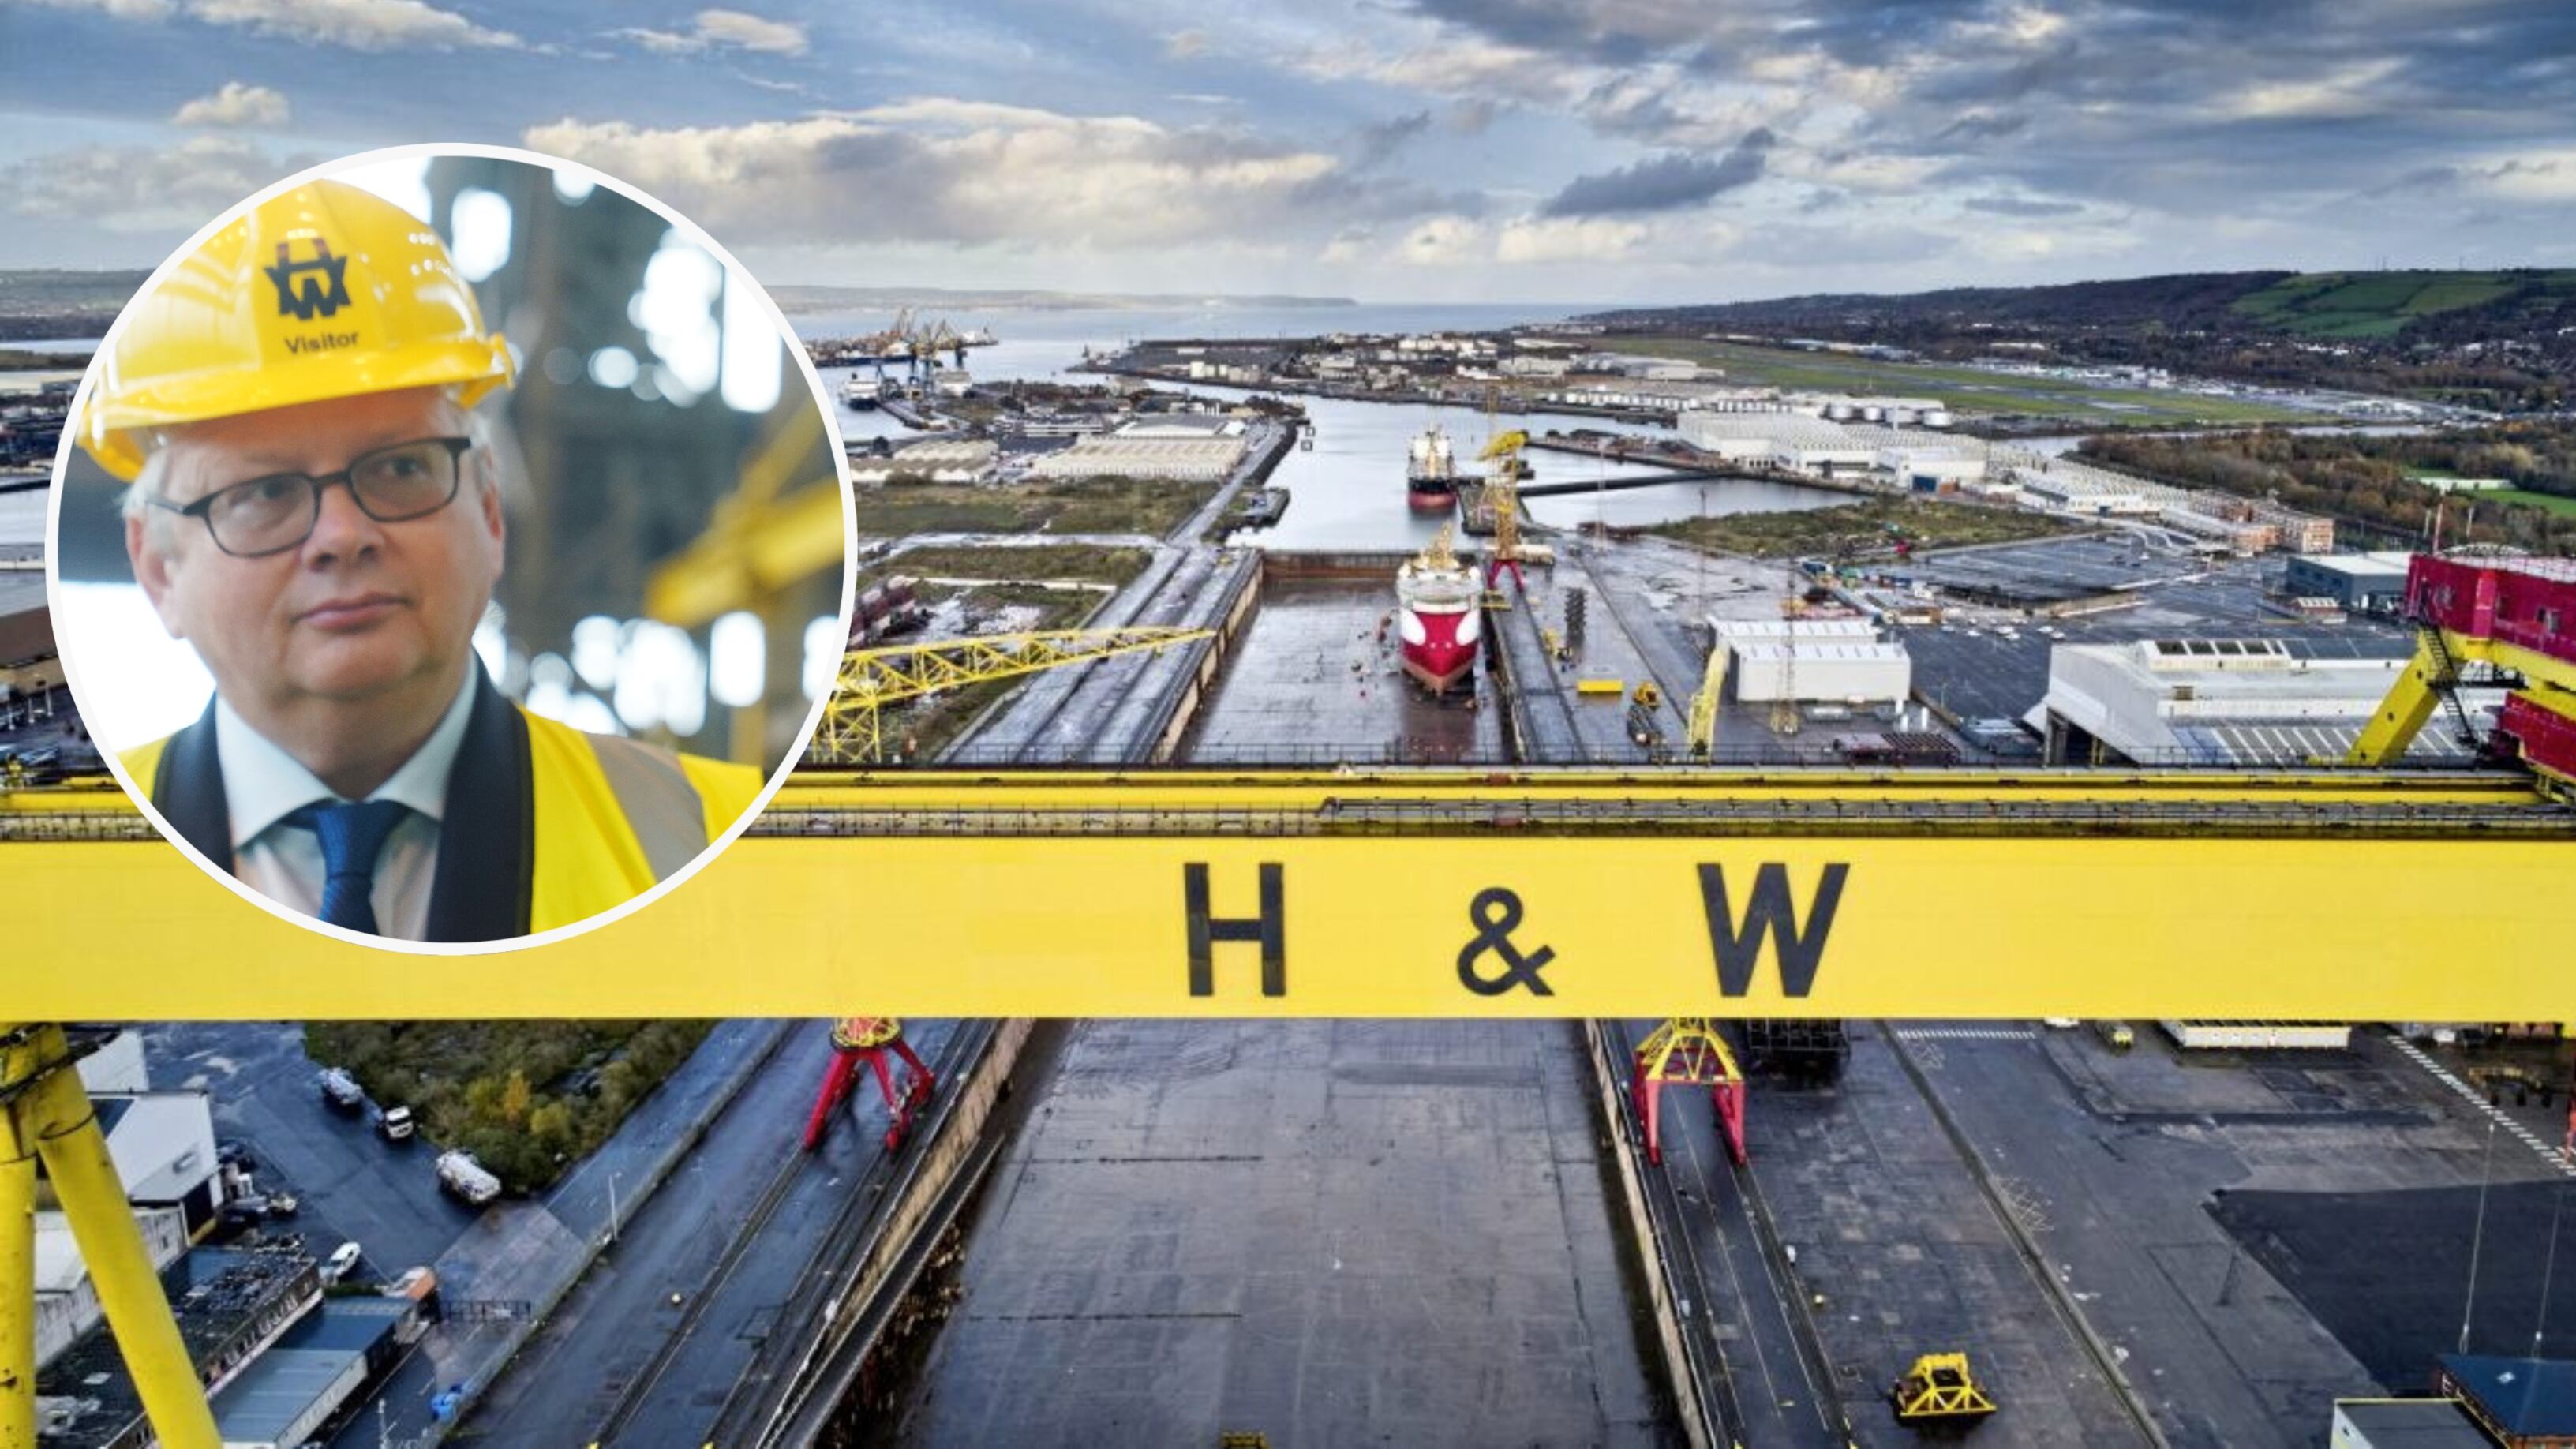 Aerial view of the Harland & Wolff shipyard, including the famous yellow cranes. Inset image of group CEO John Wood.